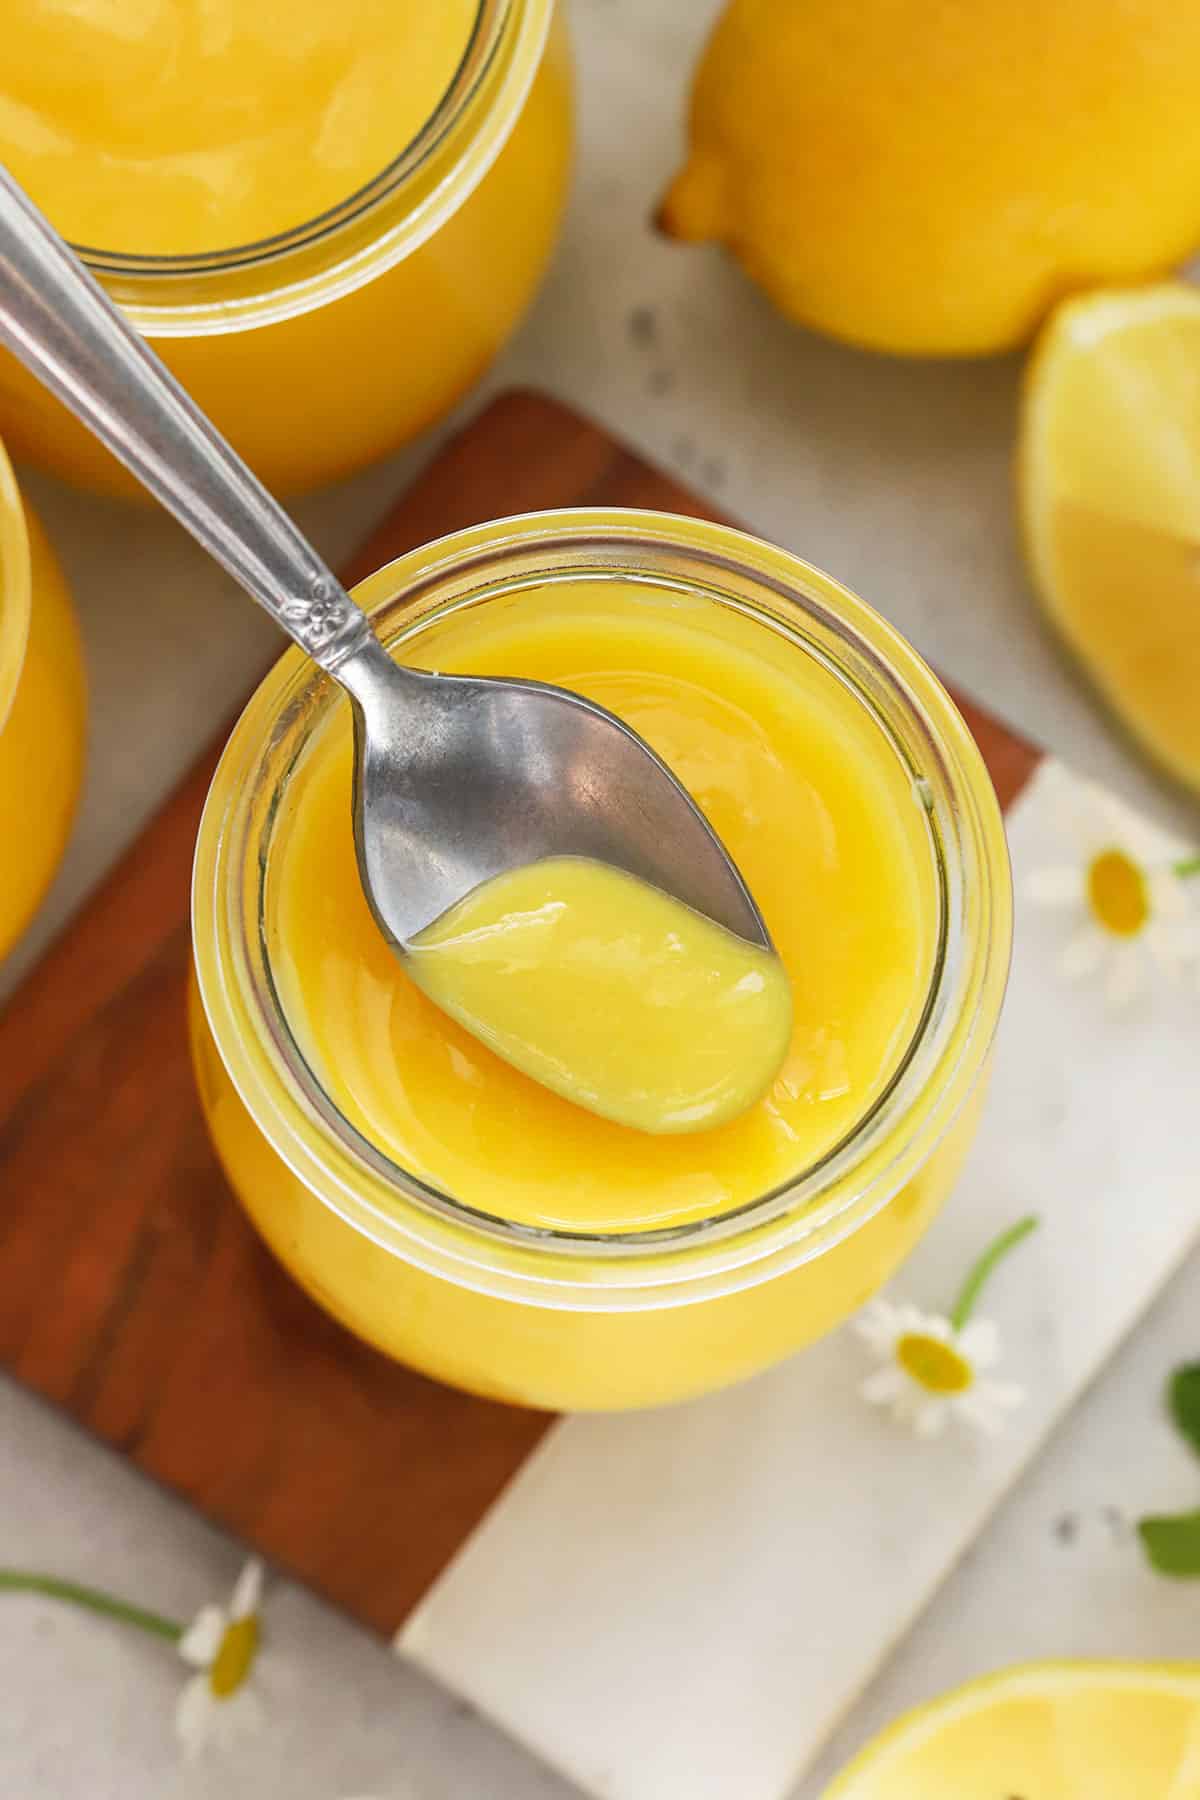 Our easy homemade lemon curd recipe tastes like sunshine! It's surprisingly simple to make (with just 5 ingredients!) and it adds zesty lemon flavor to cheesecake, scones, and all kinds of delicious desserts. In our post, you'll learn how to make lemon curd from scratch, how to store lemon curd, and 12+ delicious ways to use it.